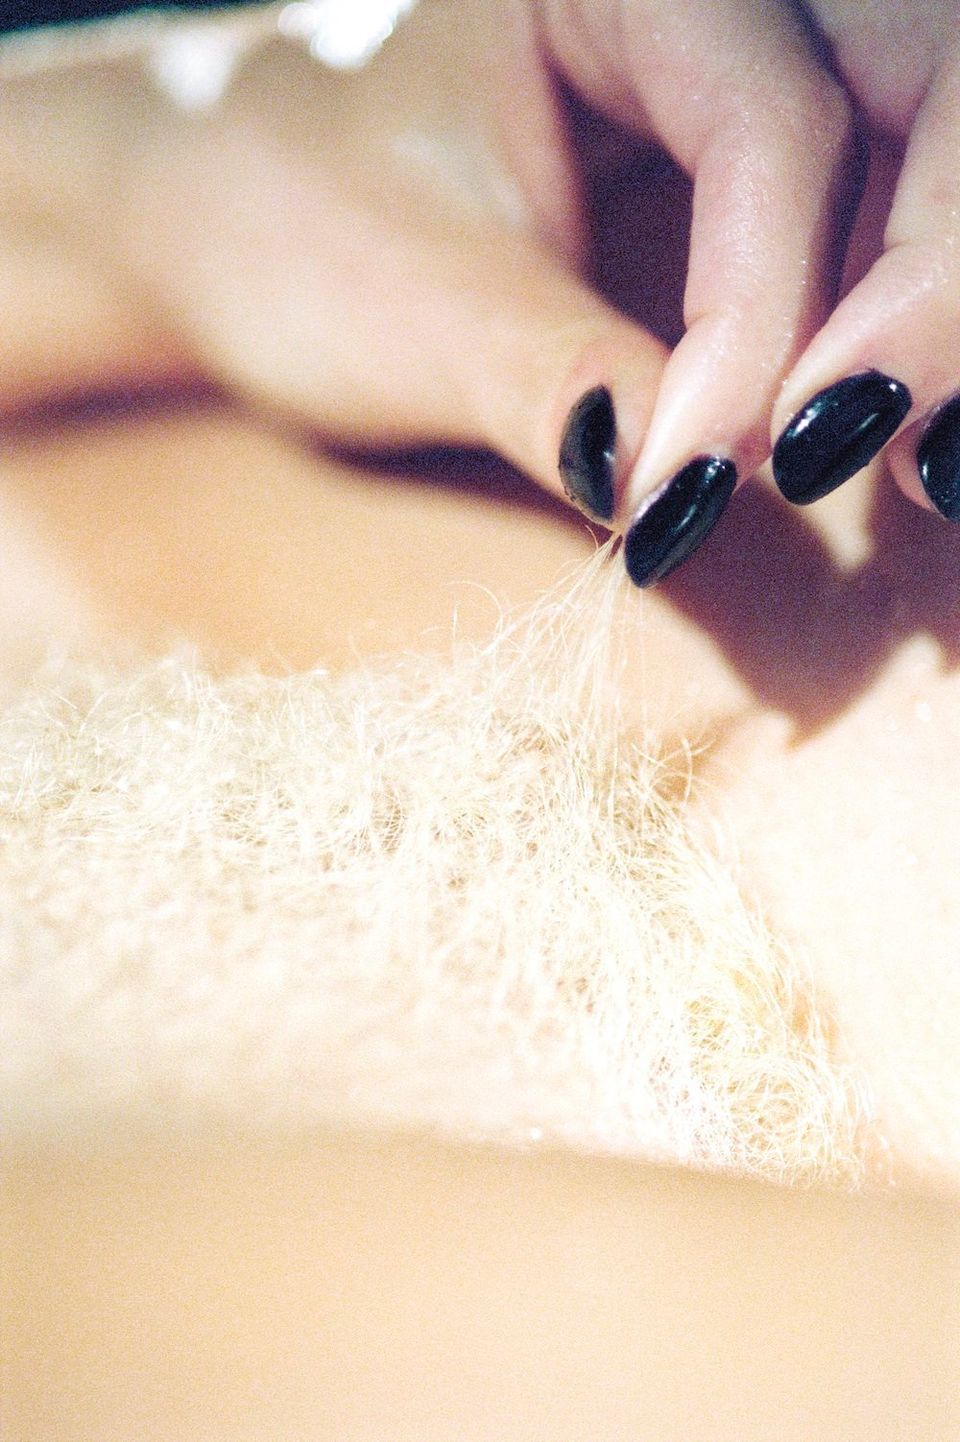 Gloriously NSFW Art Book Examines The Beauty Of Female Pubic Hair |  HuffPost Entertainment